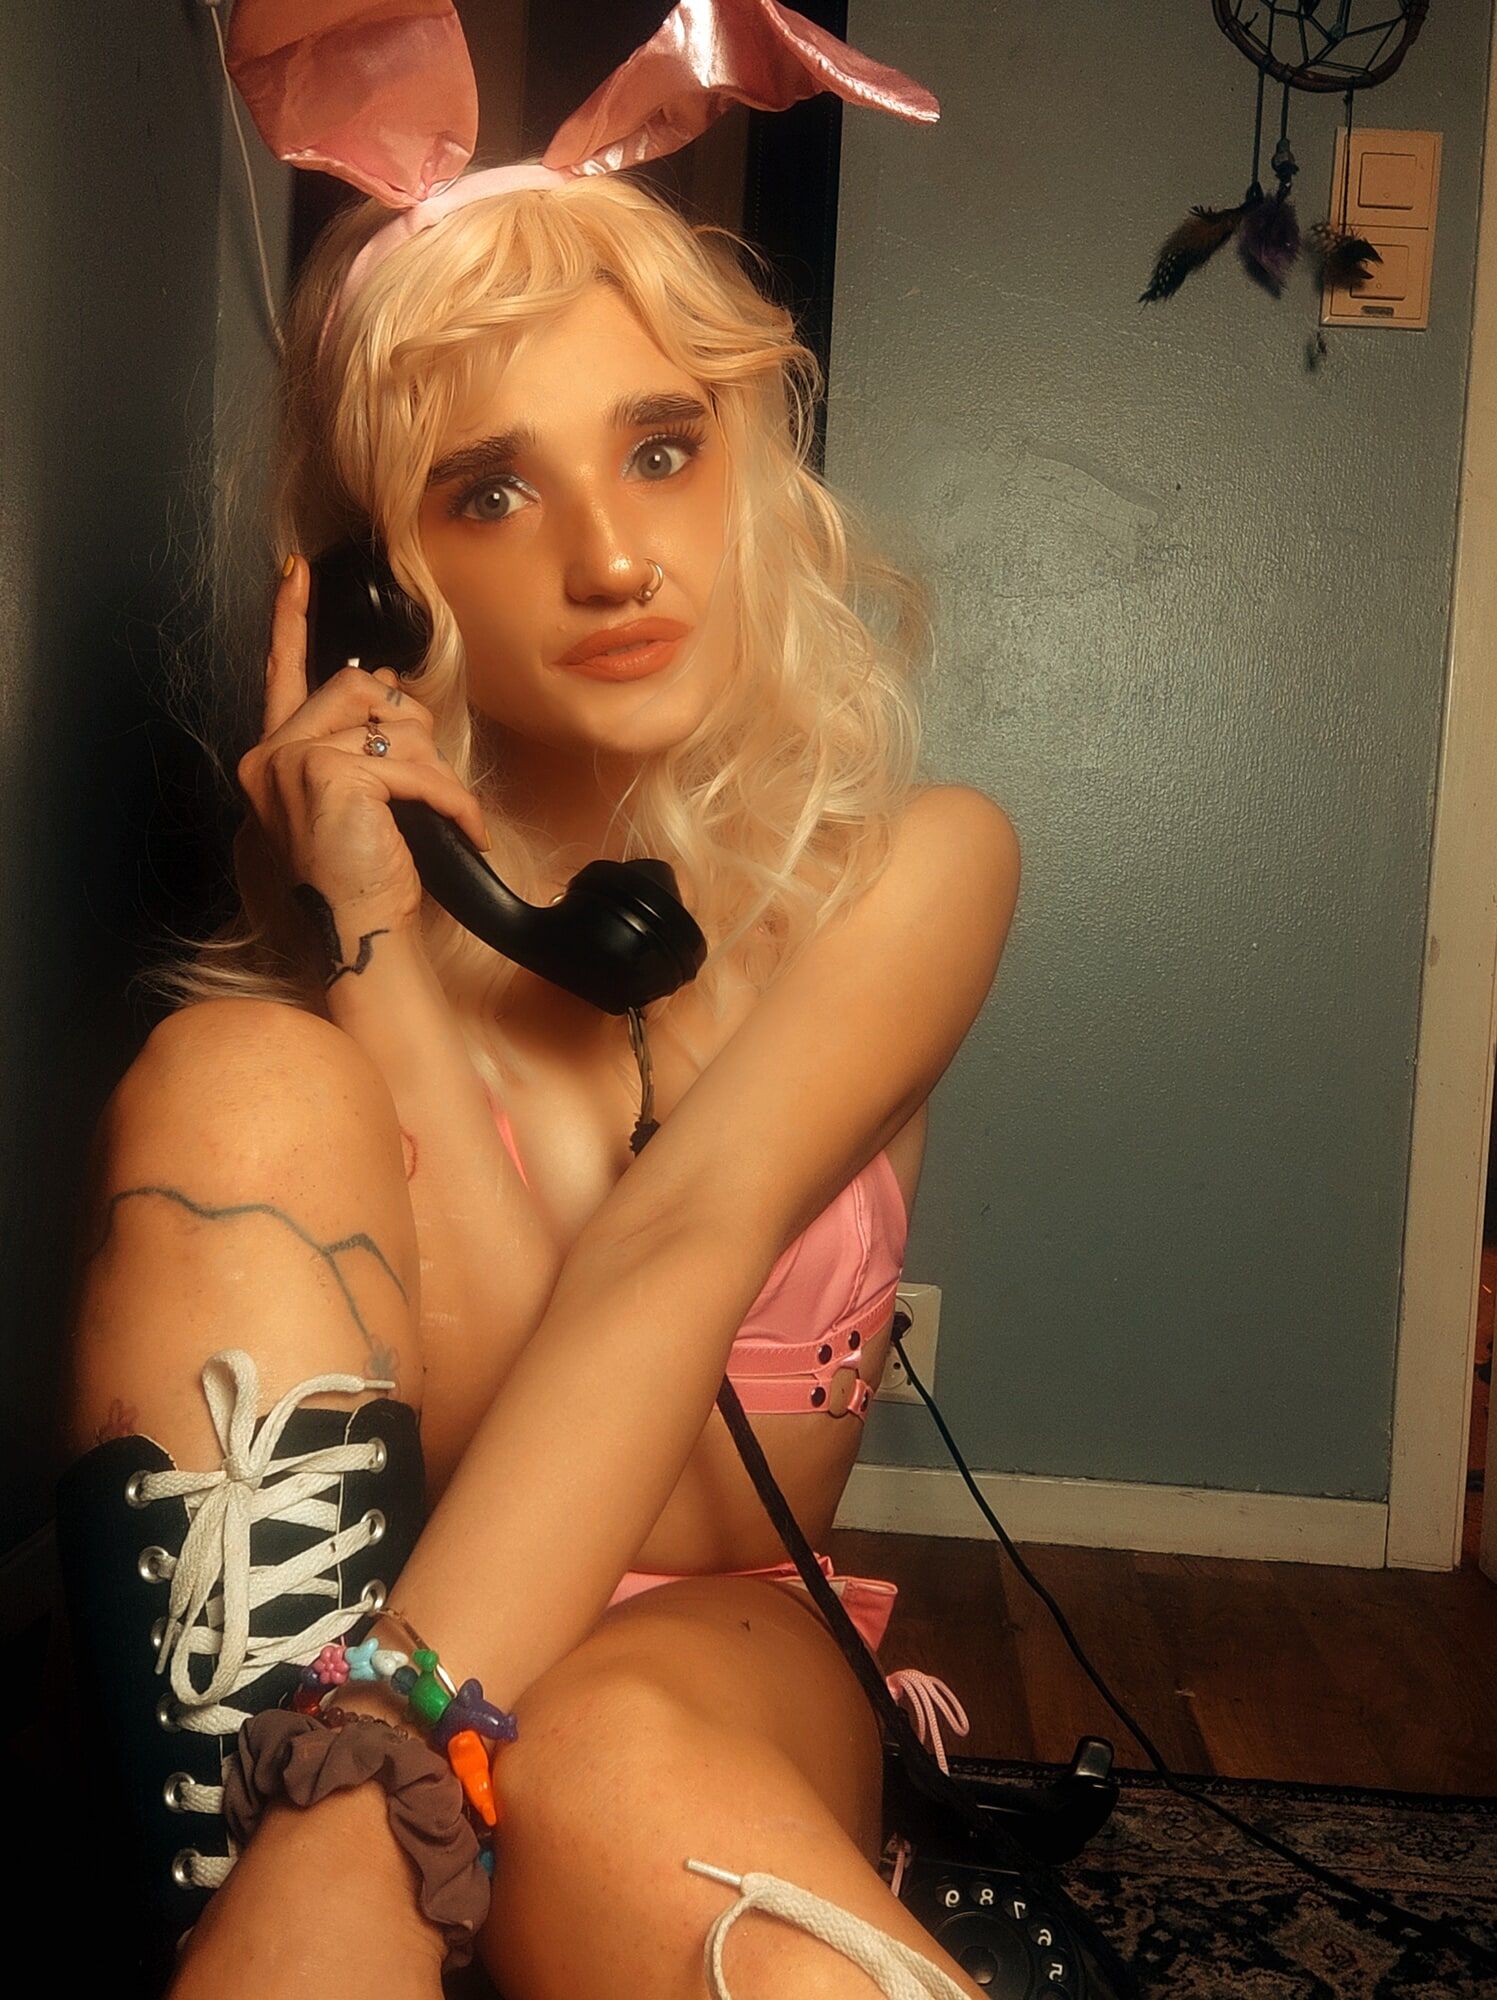 Pink bunny talking on the phone while showing off pussy #2